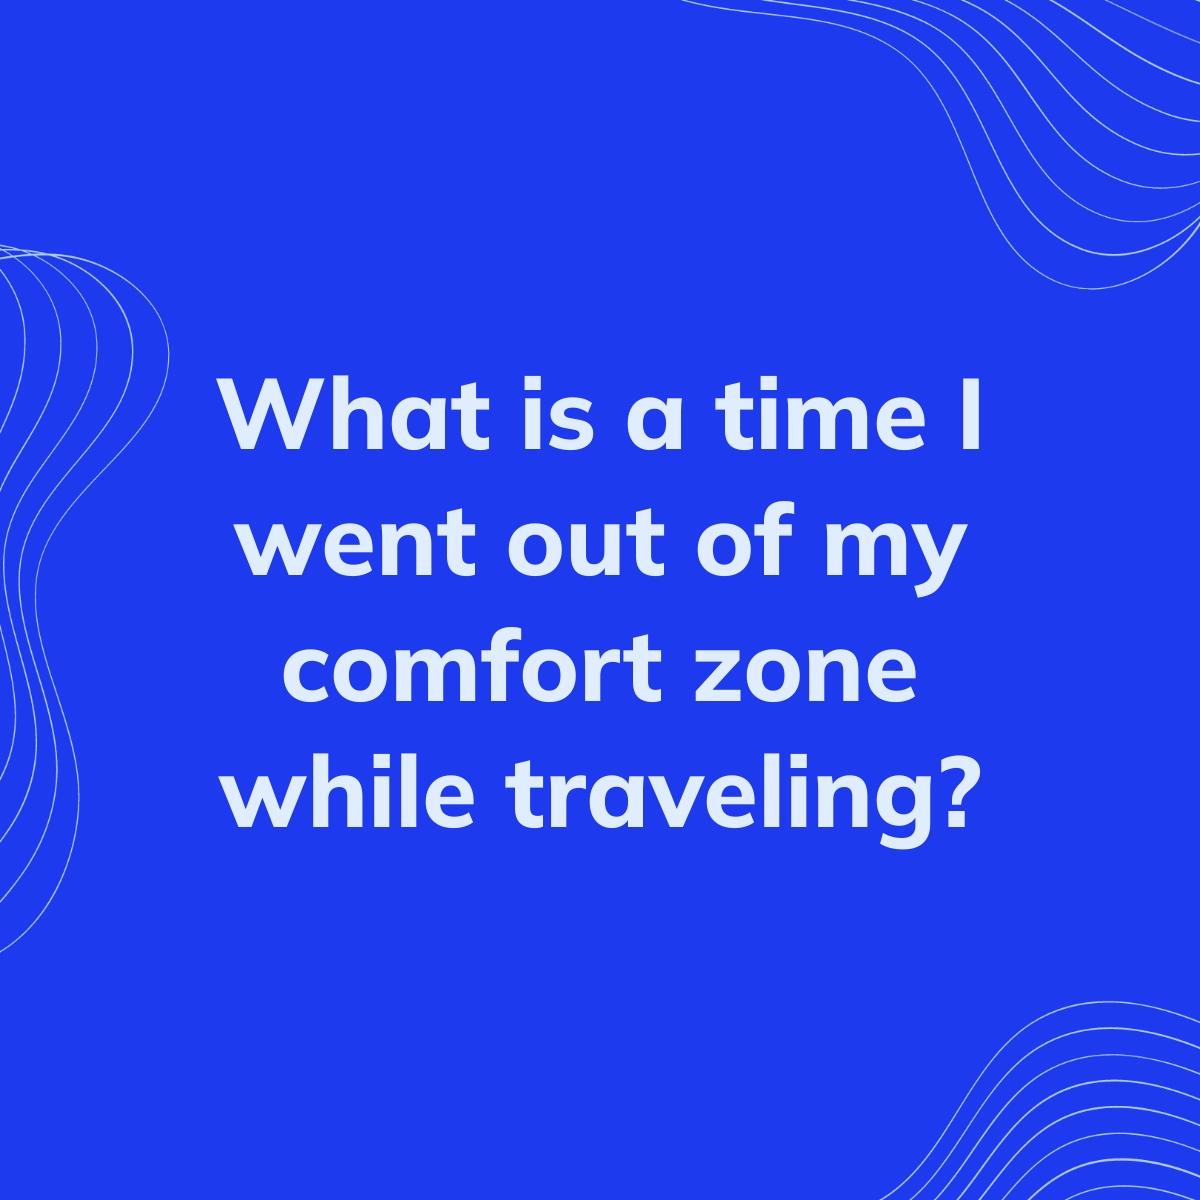 Journal Prompt: What is a time I went out of my comfort zone while traveling?